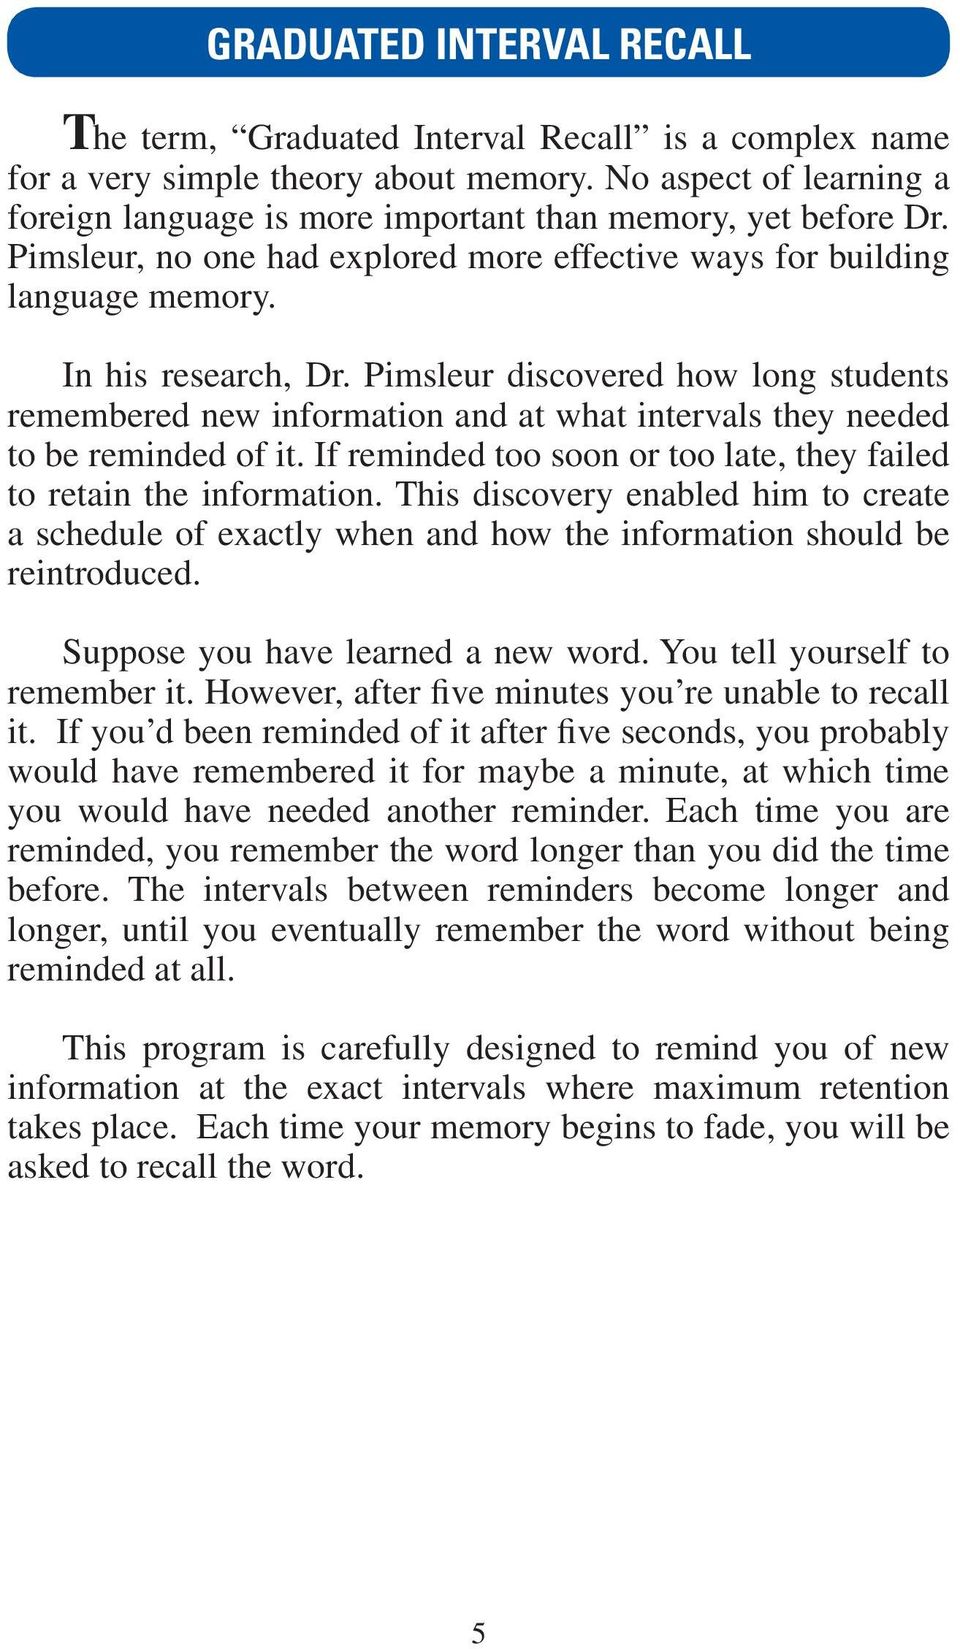 Pimsleur discovered how long students remembered new information and at what intervals they needed to be reminded of it. If reminded too soon or too late, they failed to retain the information.